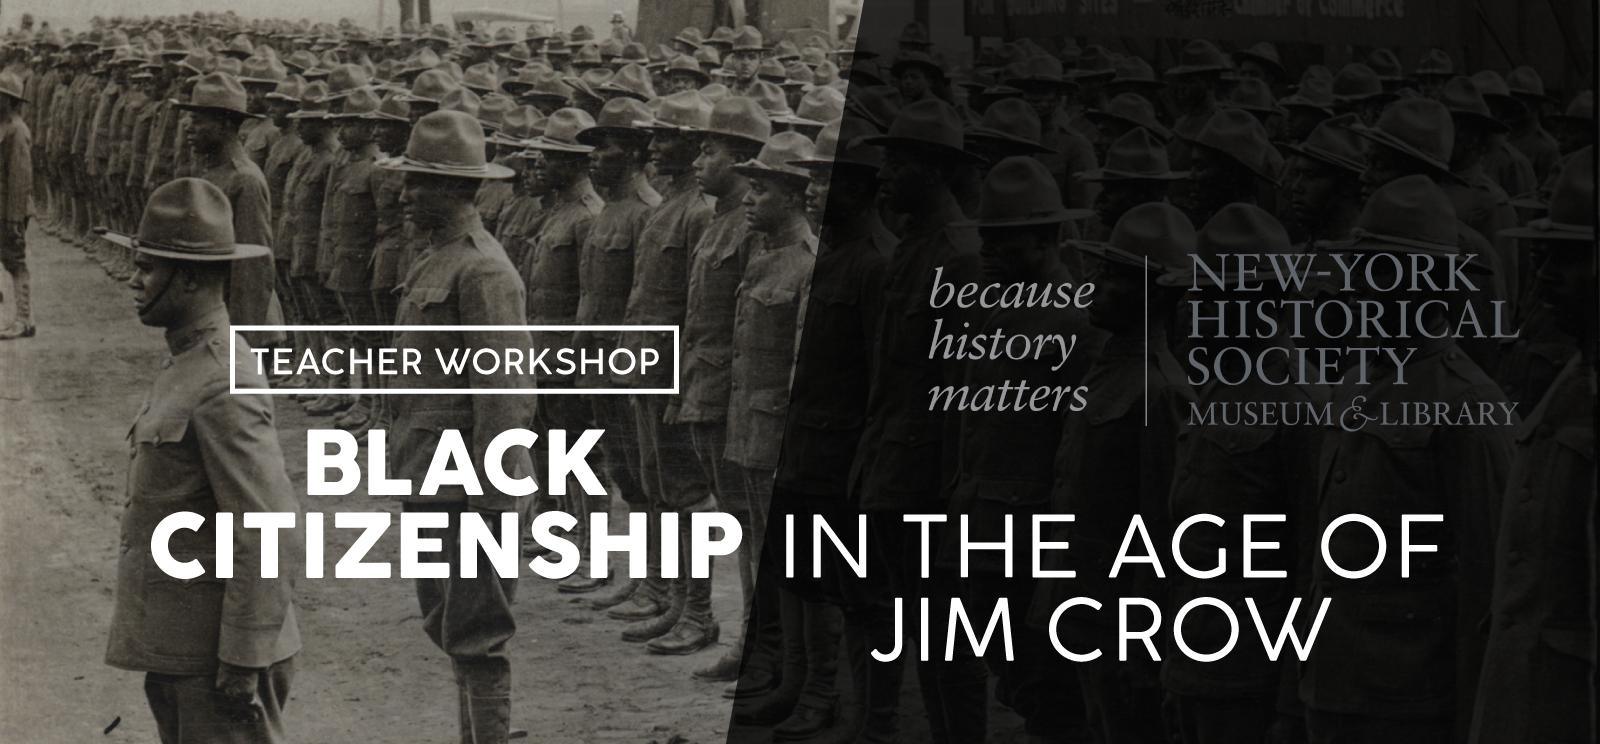 Background image: Black and white photograph of Black WWI soldiers lined up in parade formation. Text: Teacher Workshop / Black Citizenship in the Age of Jim Crow / New-York Historical Society / because history matters